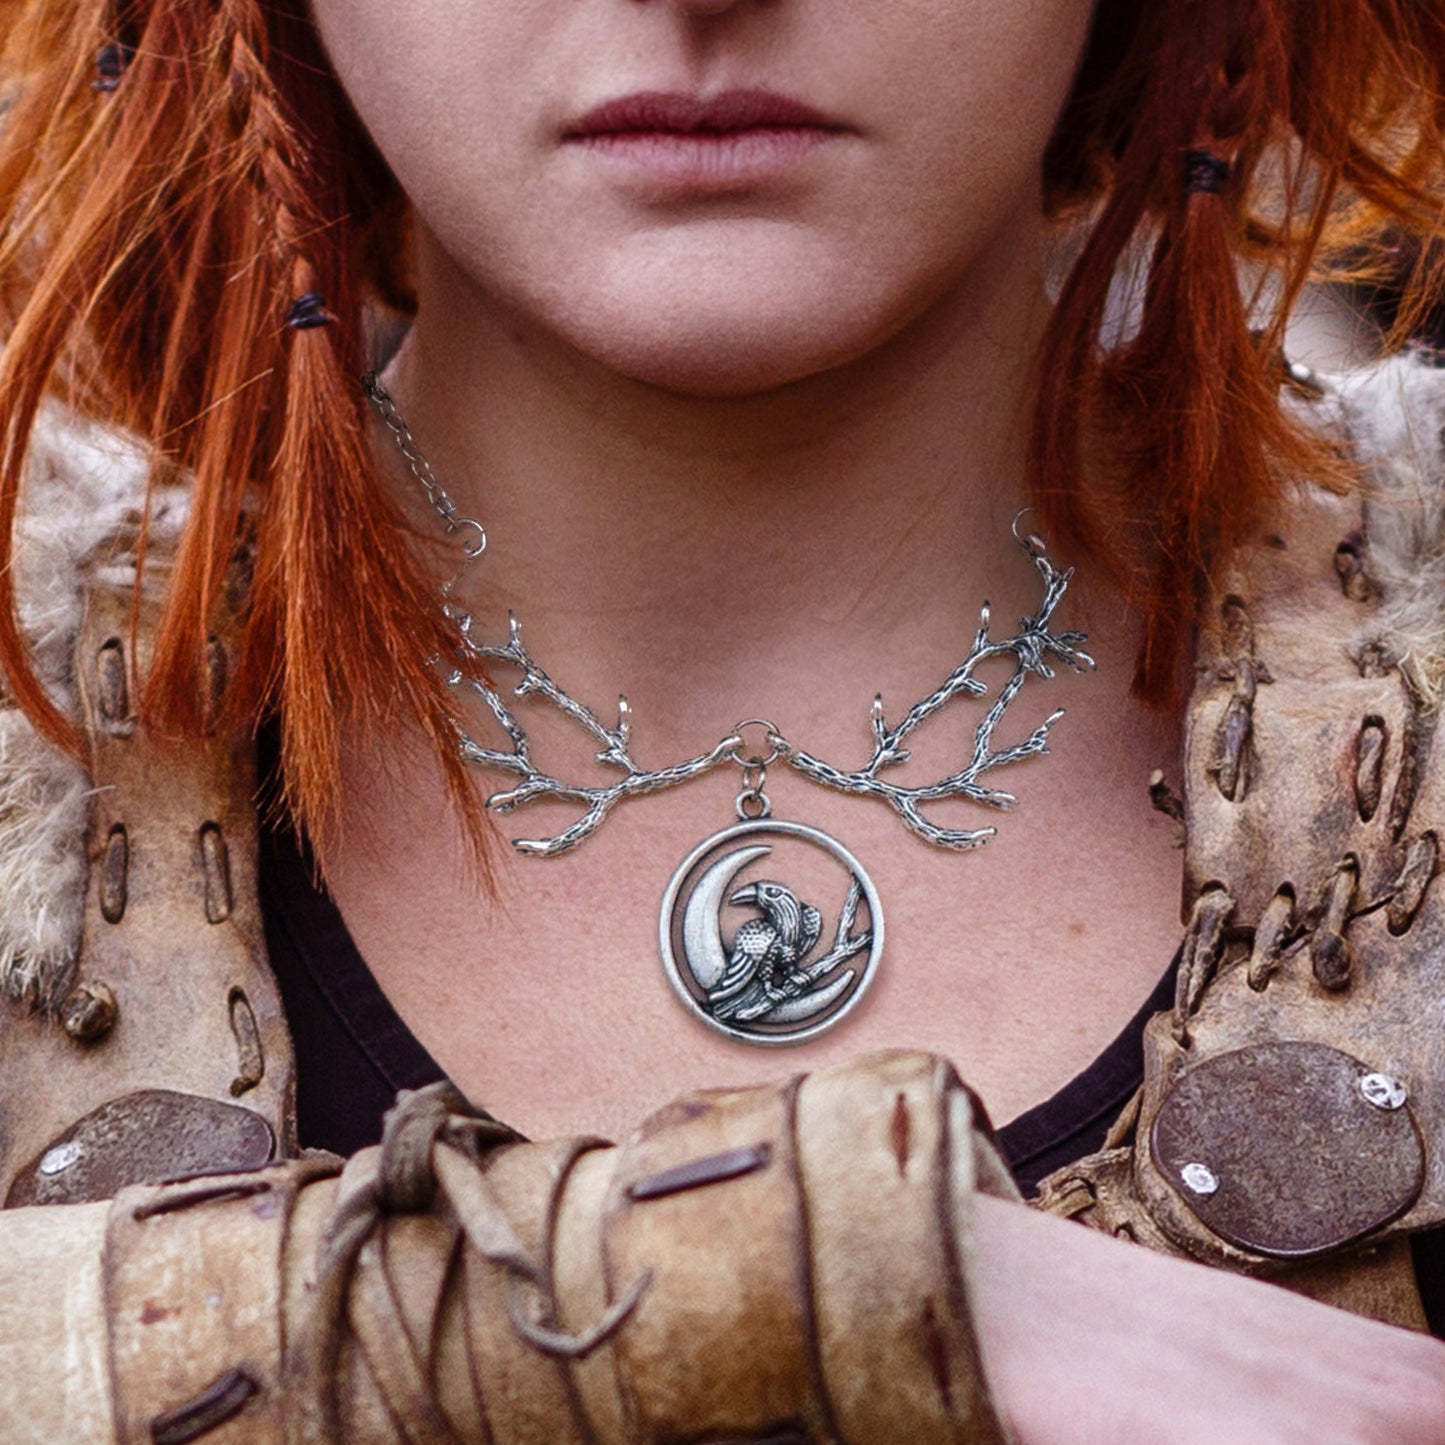 Close up of a red-haired female model wearing a silver necklace. The necklace has an upper section in the shape of tree branches. A round pendant hangs from the bottom of the branches. Inside the pendant is a crow perched on a twig, in front of a crescent moon. The model is dressed in Viking-style clothing.